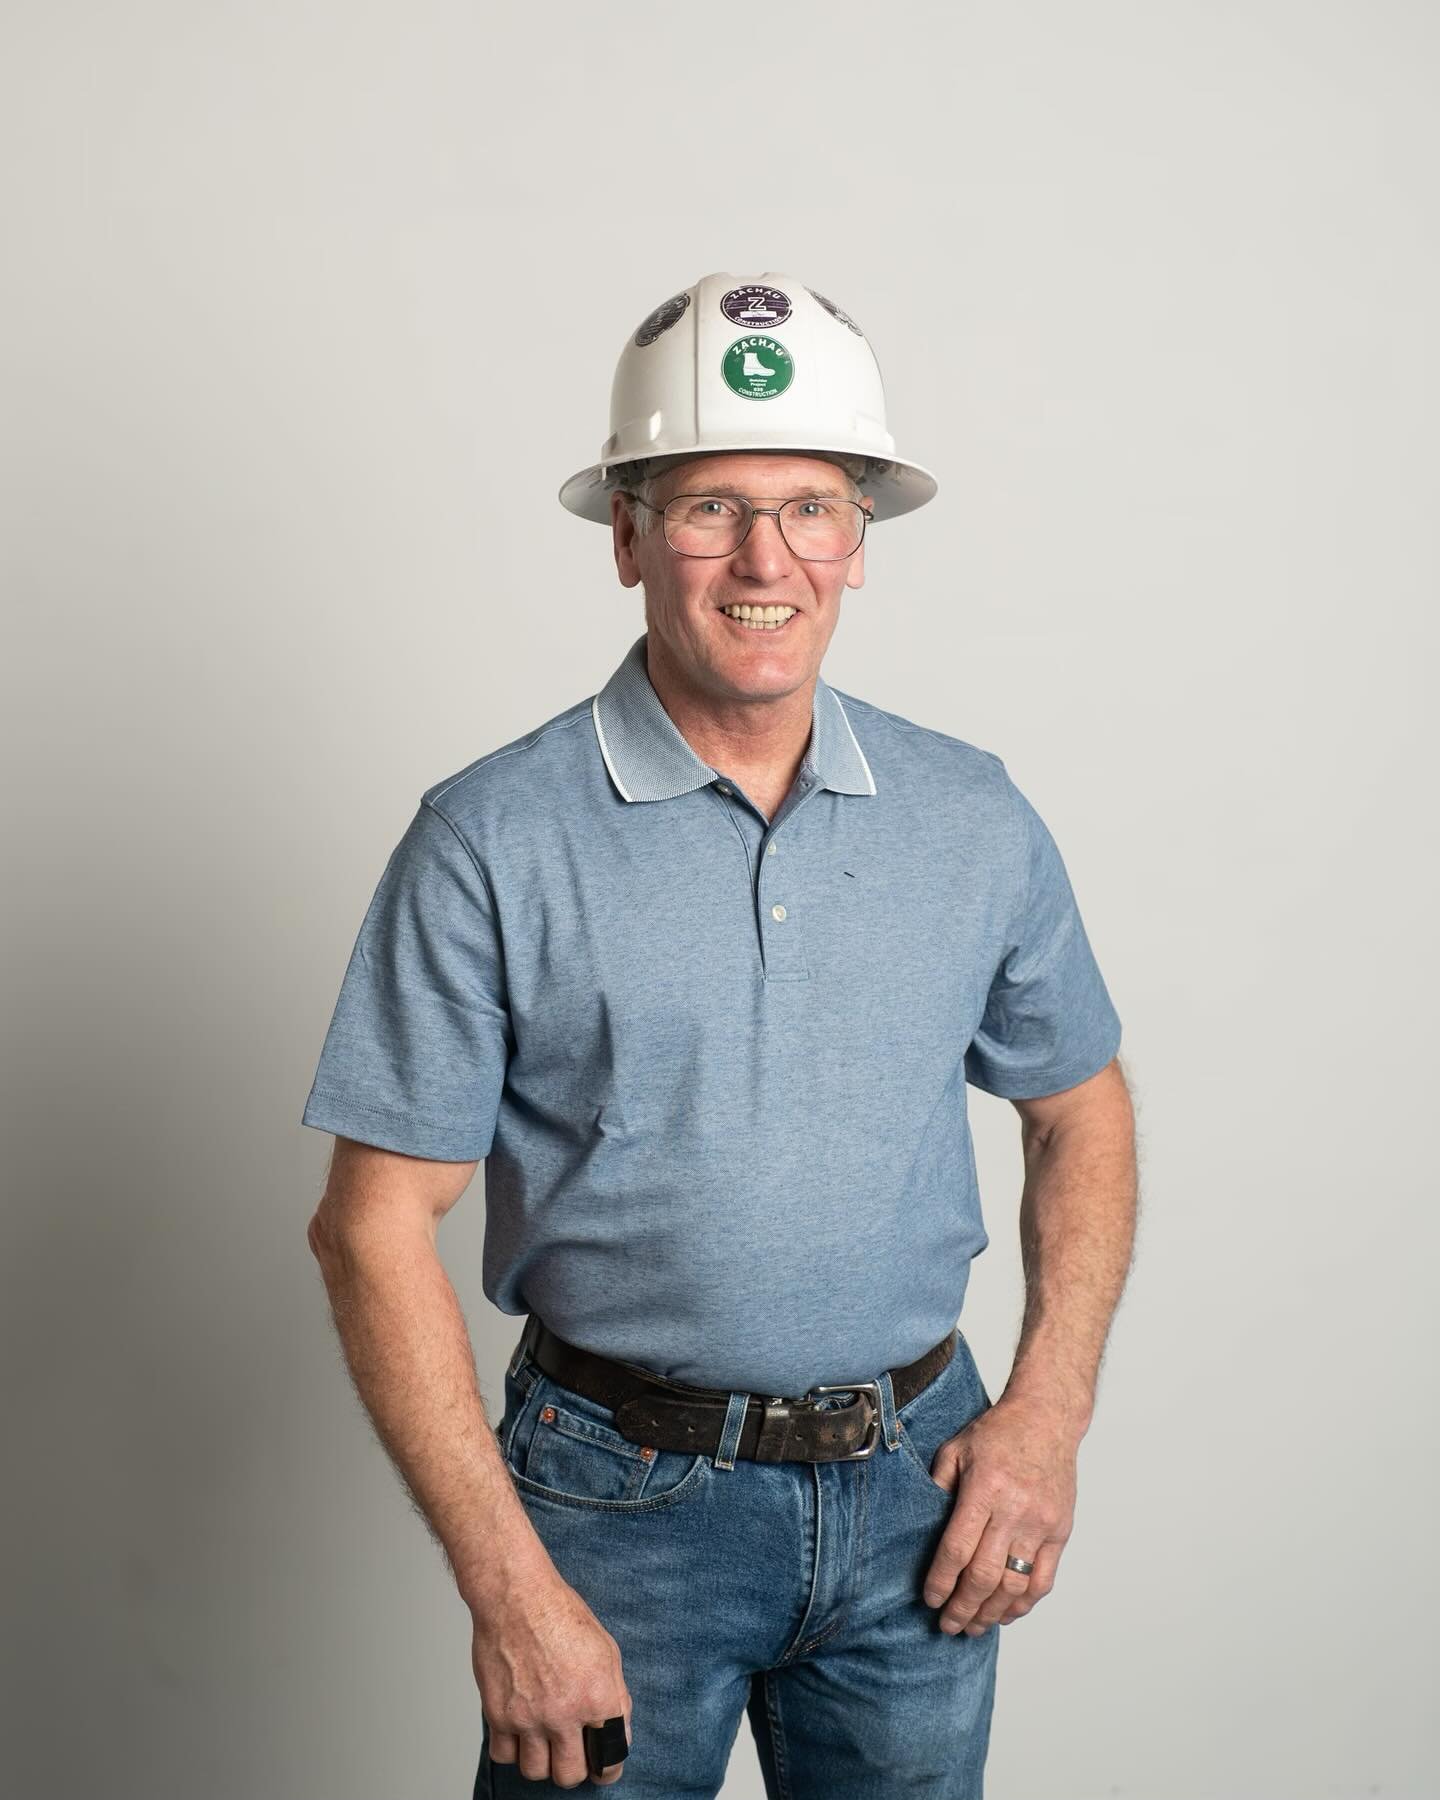 Congratulations to John Davis on his 20th&nbsp;anniversary with Zachau Construction. John is dedicated, diligent and kind. His presence is appreciated on all the jobs he works on. When John is not working, he is an avid ballroom dancer (and quite goo